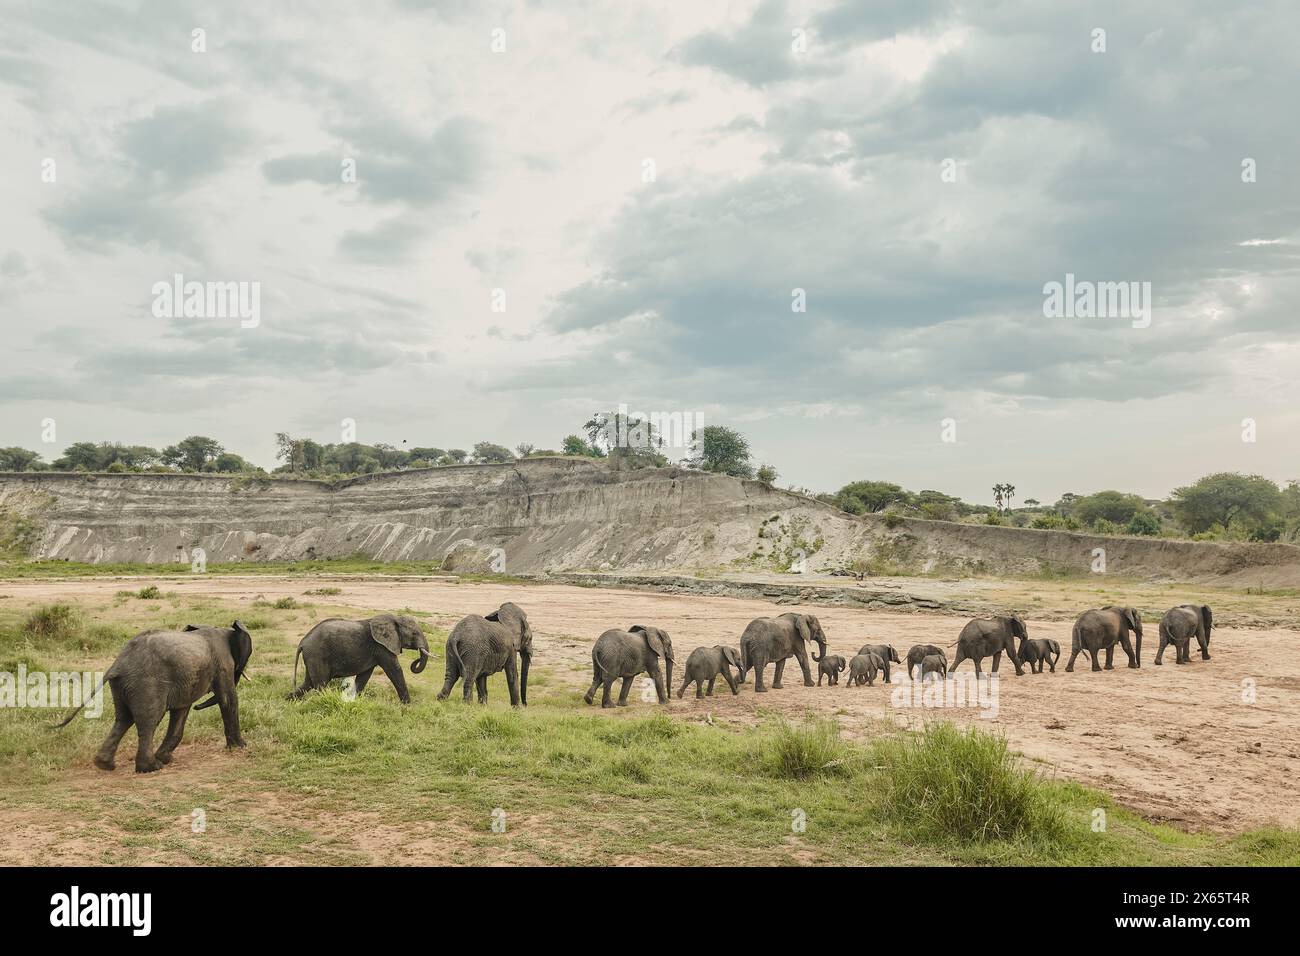 A large herd of elephant crosses a dry river bed, continuing a l Stock Photo